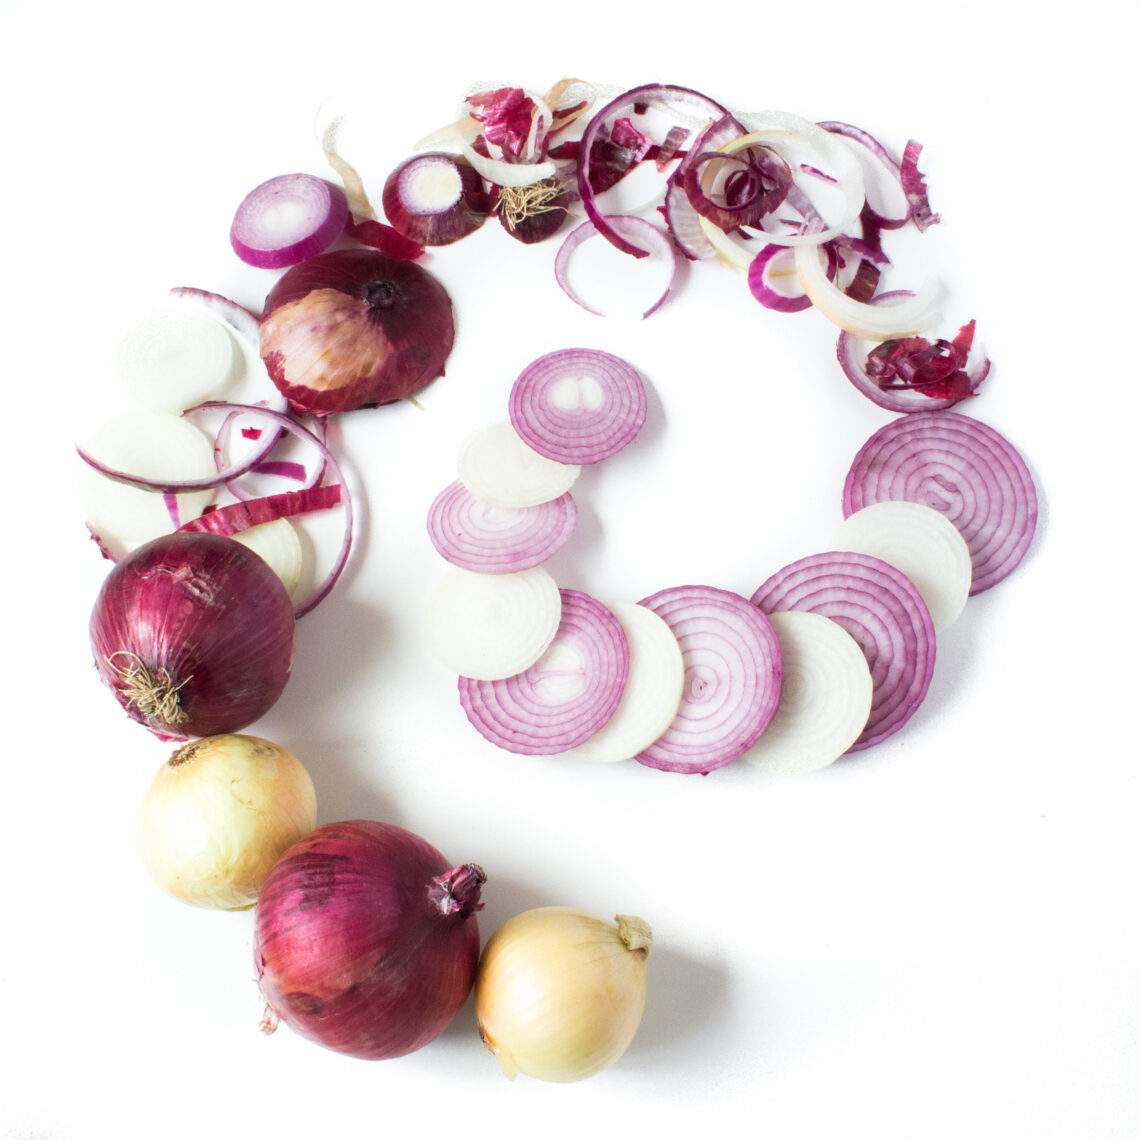 learn how and why to freeze your onions